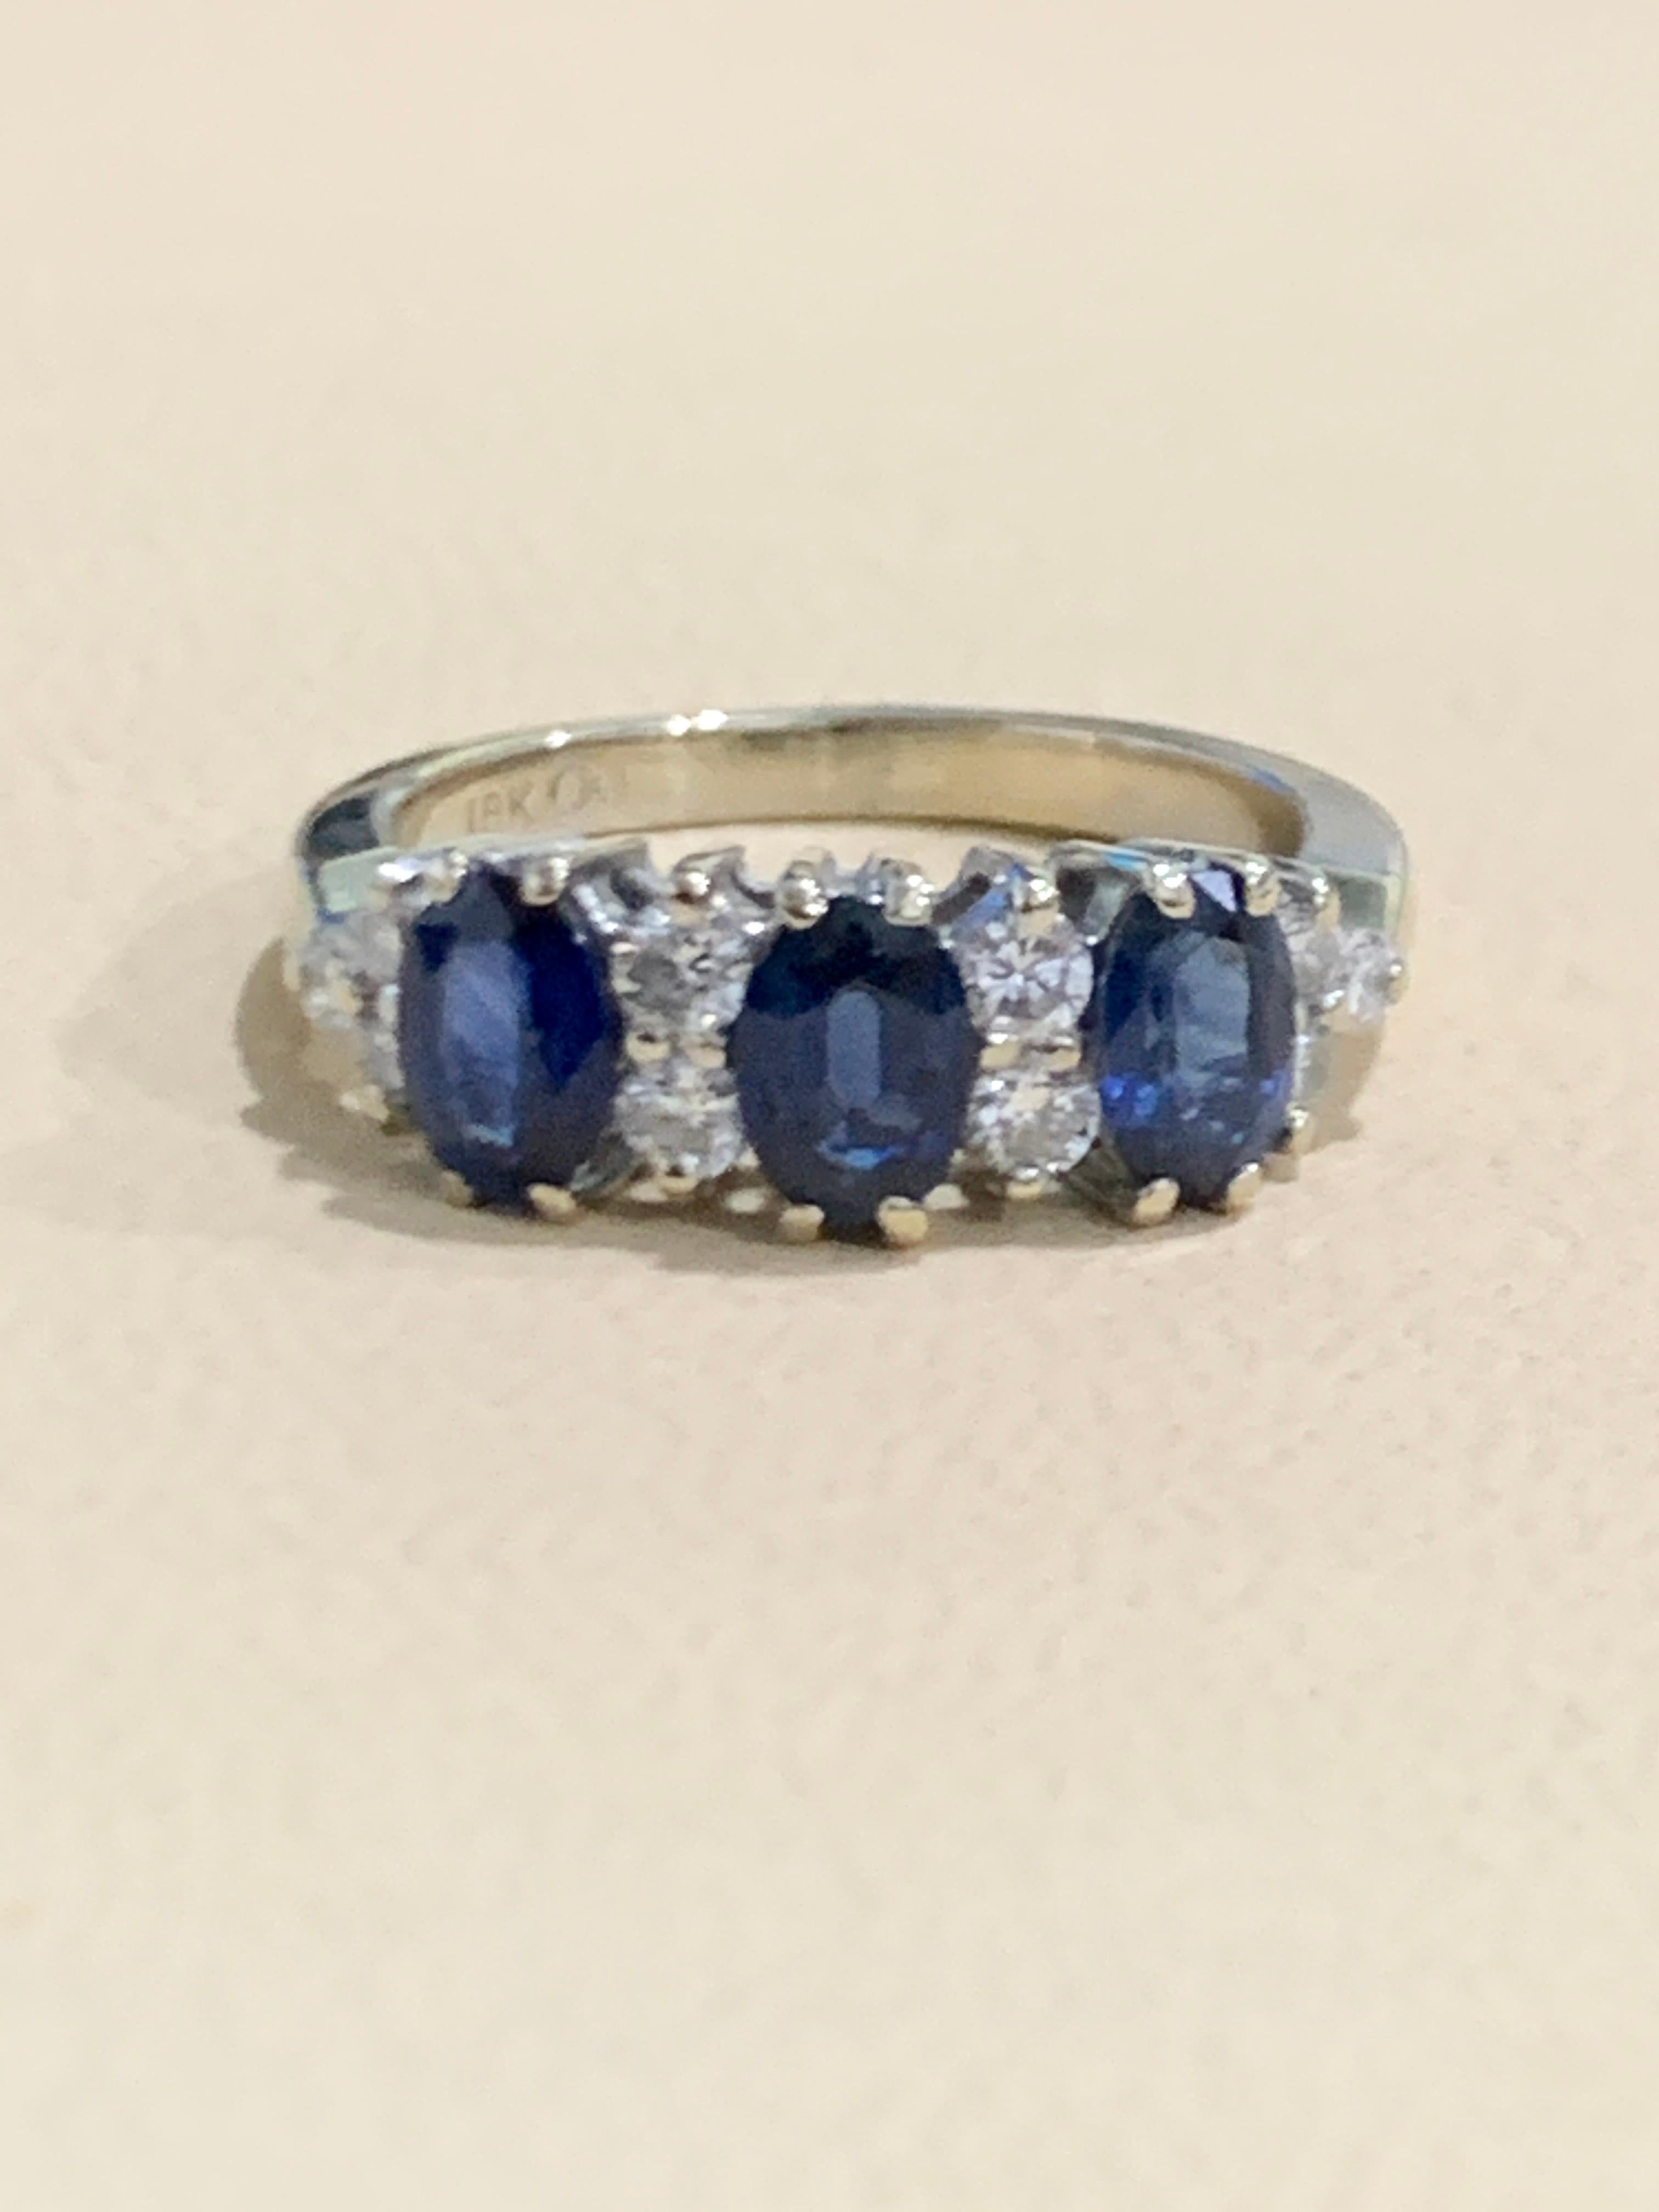 2.5ct Blue Sapphire & 0.6ct Diamond Cocktail Ring in 18 Karat White Gold Estate For Sale 7